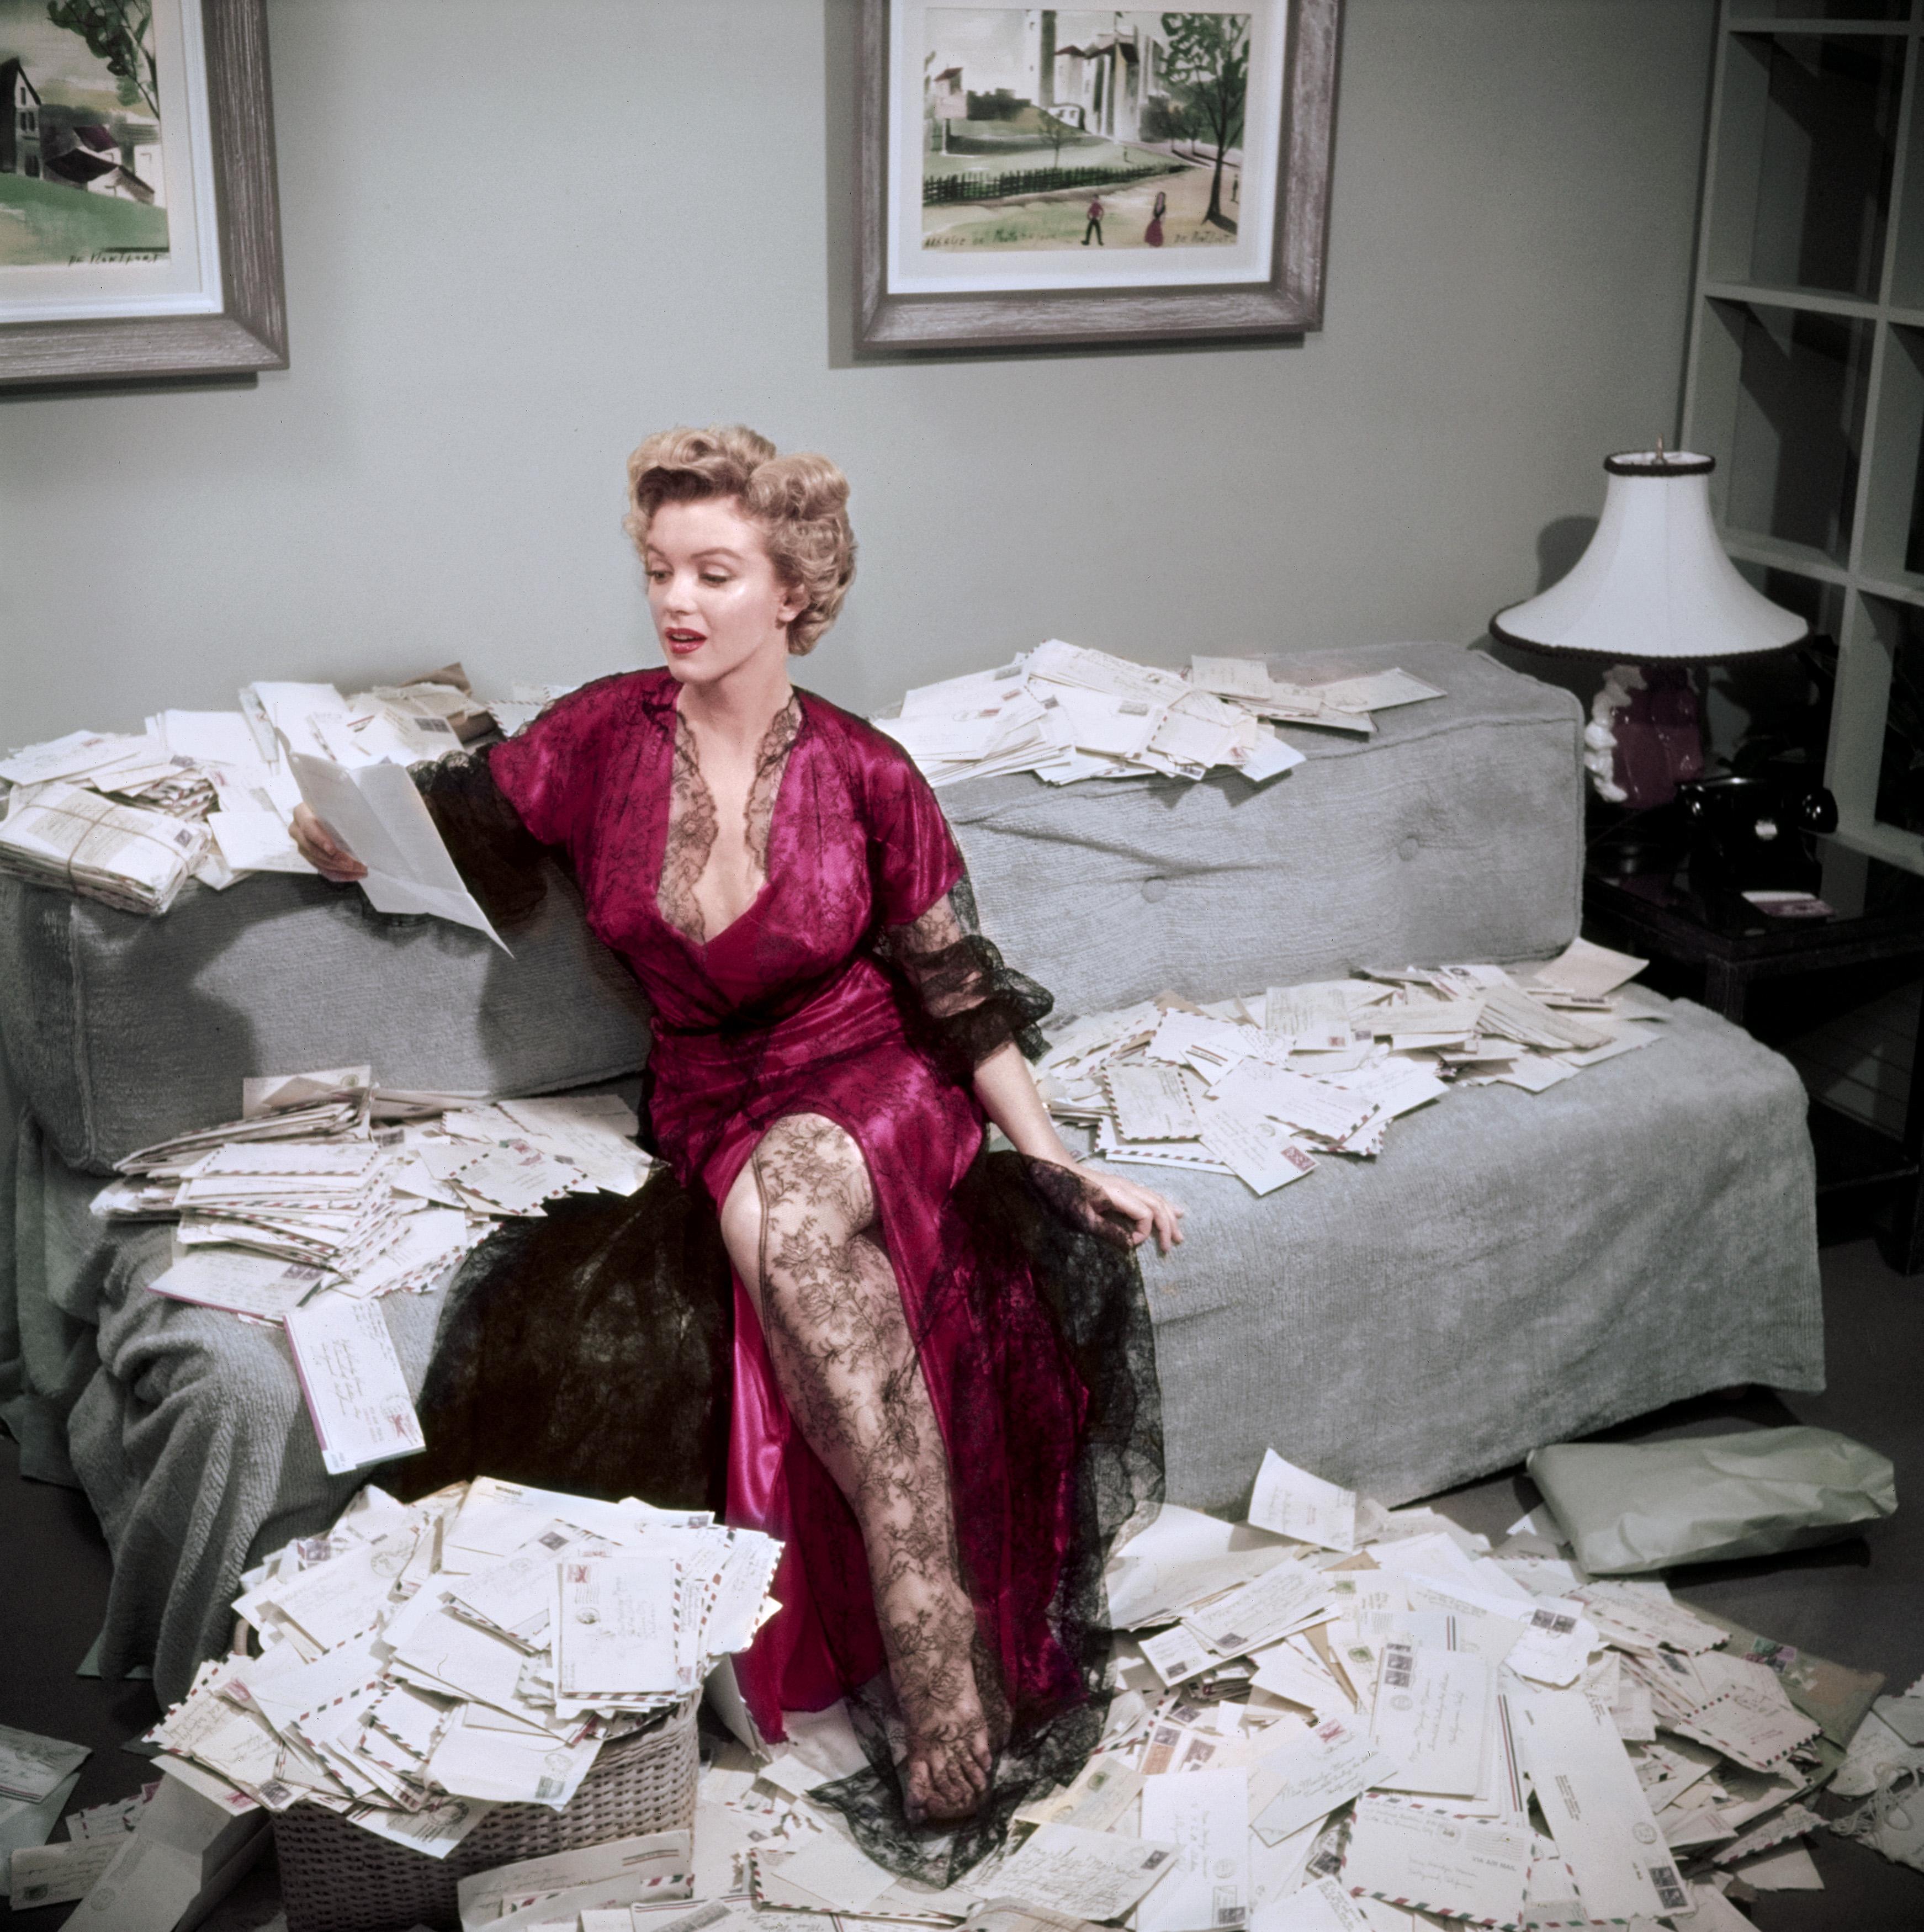 Marilyn Monroe (1926 - 1962), wearing a red negligee trimmed with black lace, sorts out her fan mail shortly after her film 'The Asphalt Jungle' had been released, Beverly Hills, 1952. (Photo by Slim Aarons/Getty Images)

Slim Aarons
Fan